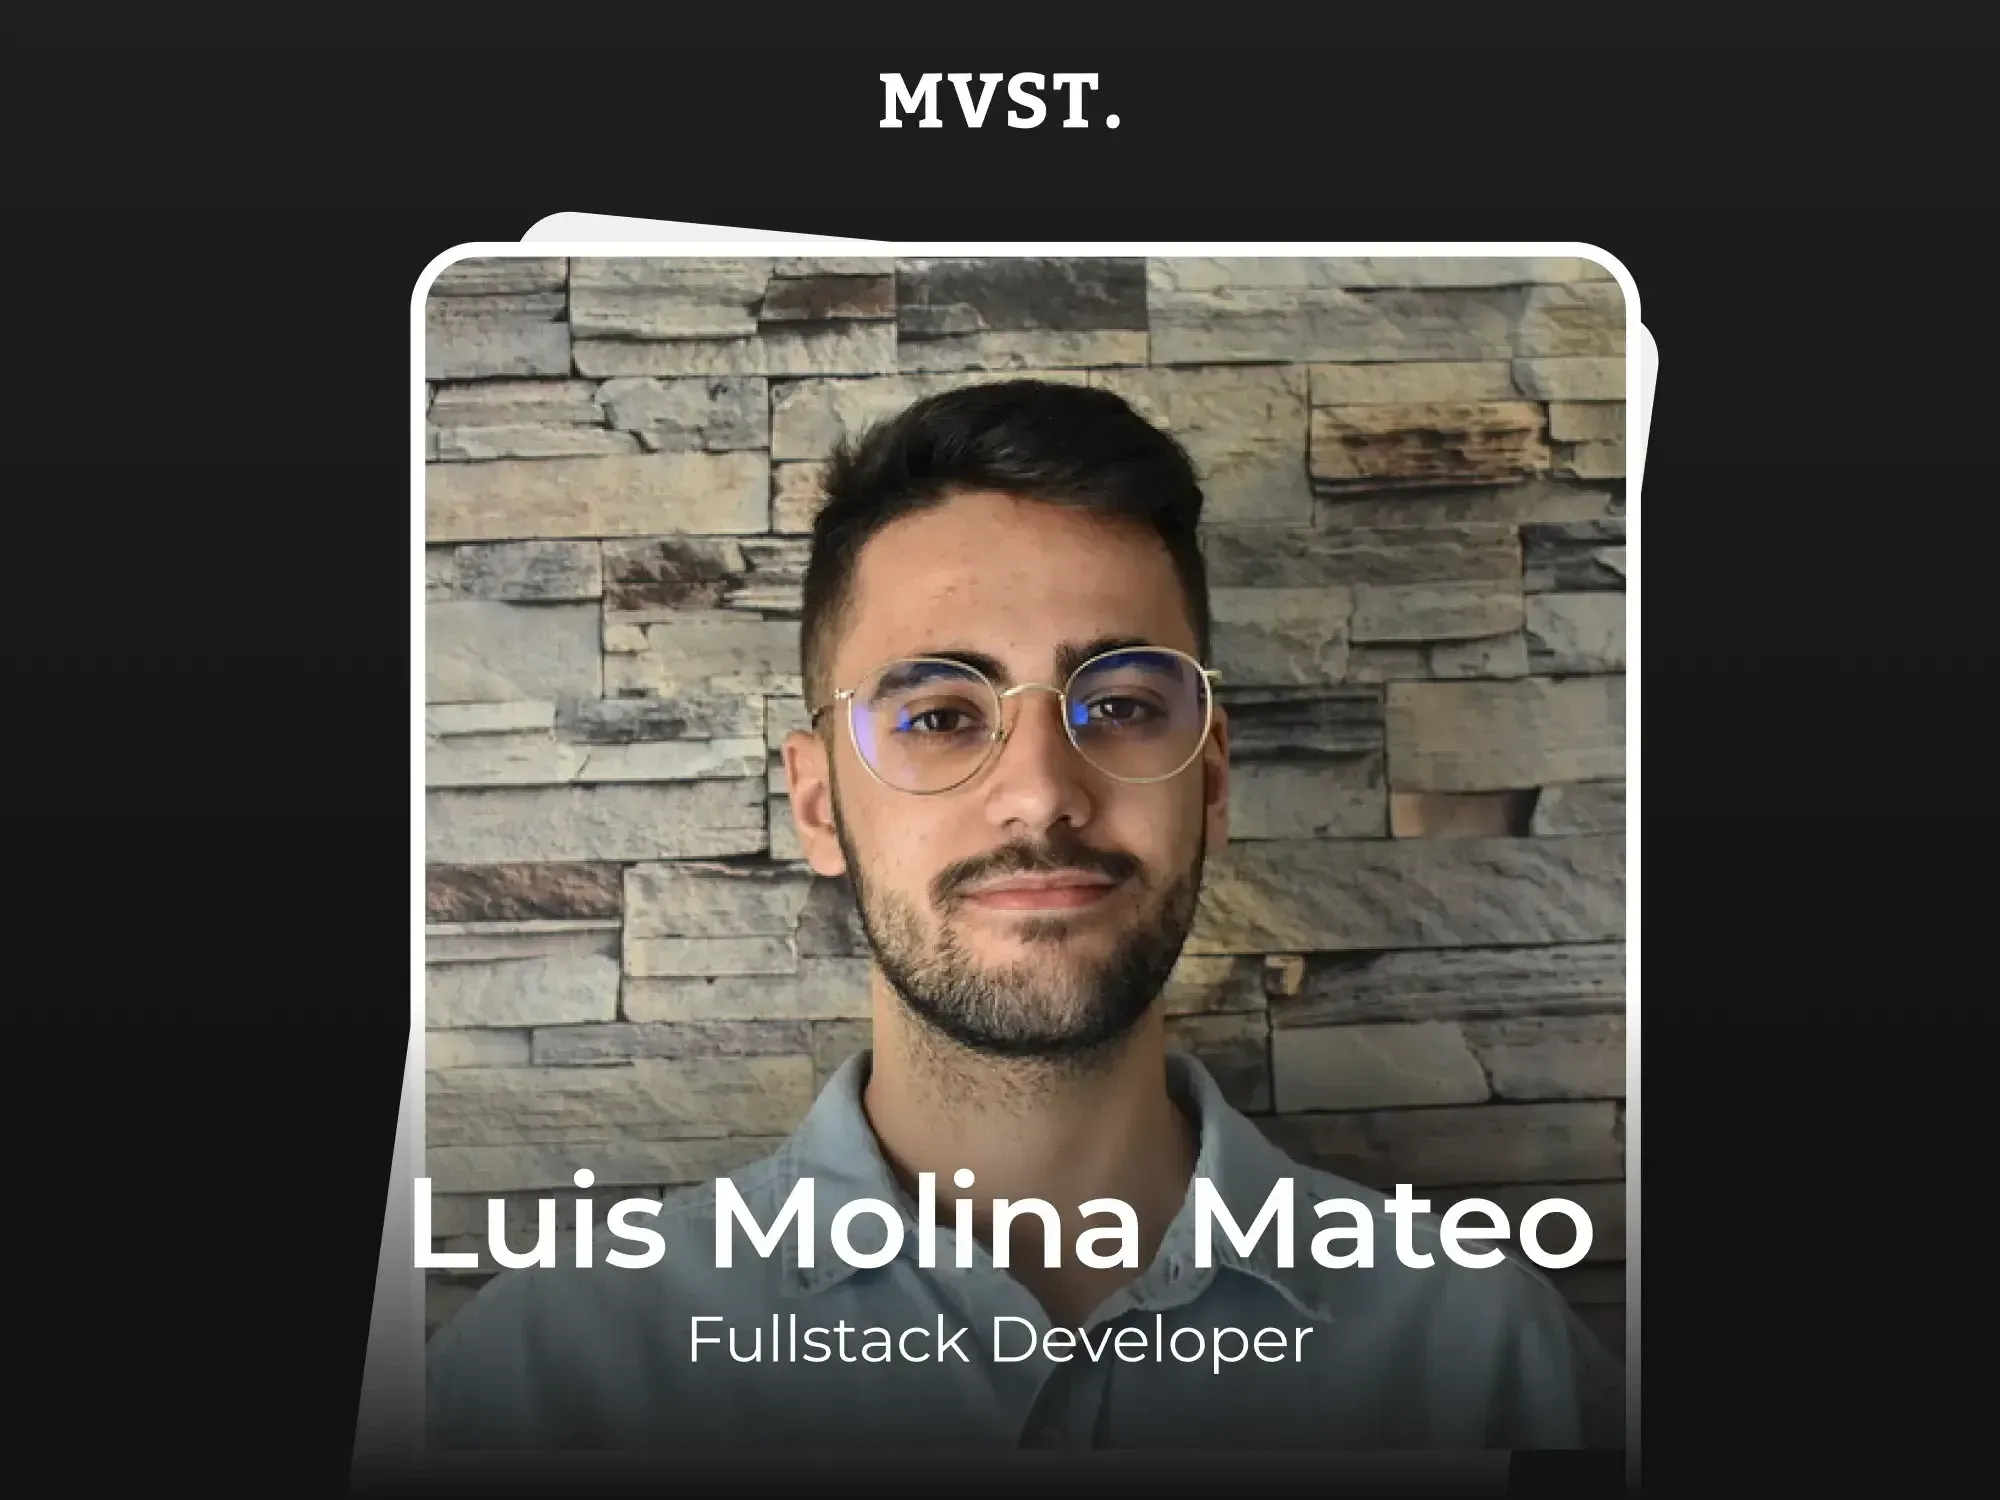 Welcome to MVST, Luis!